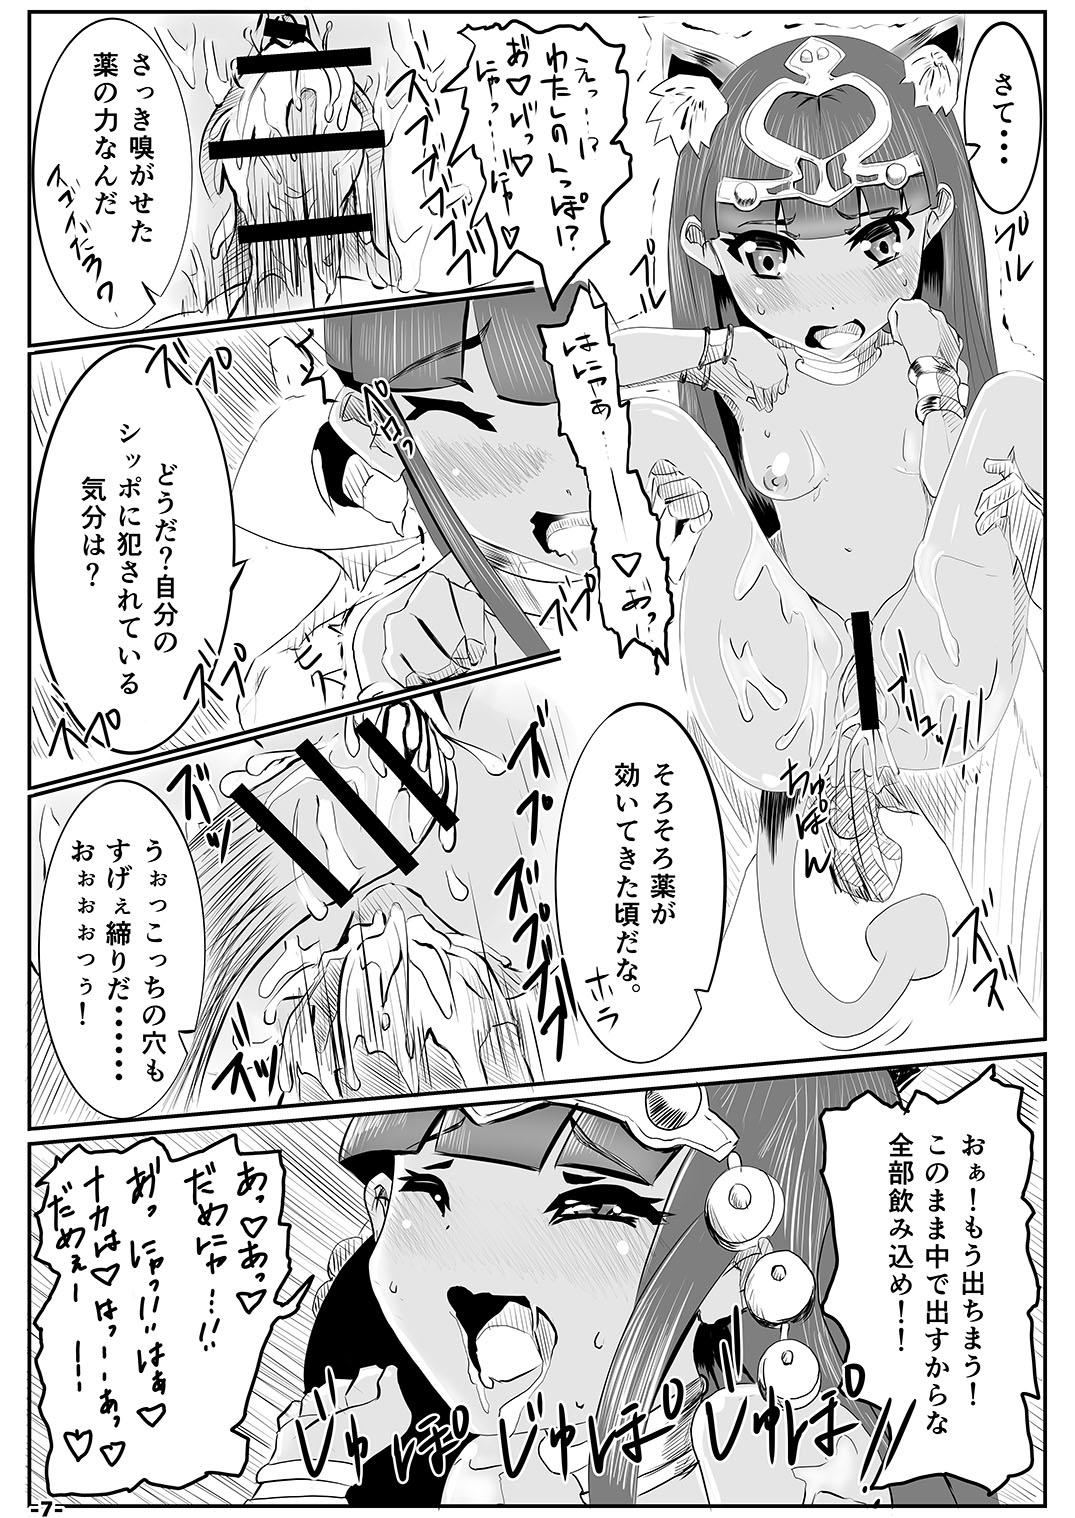 Chichona Yamiochi 2nd - Puzzle and dragons Whores - Page 6